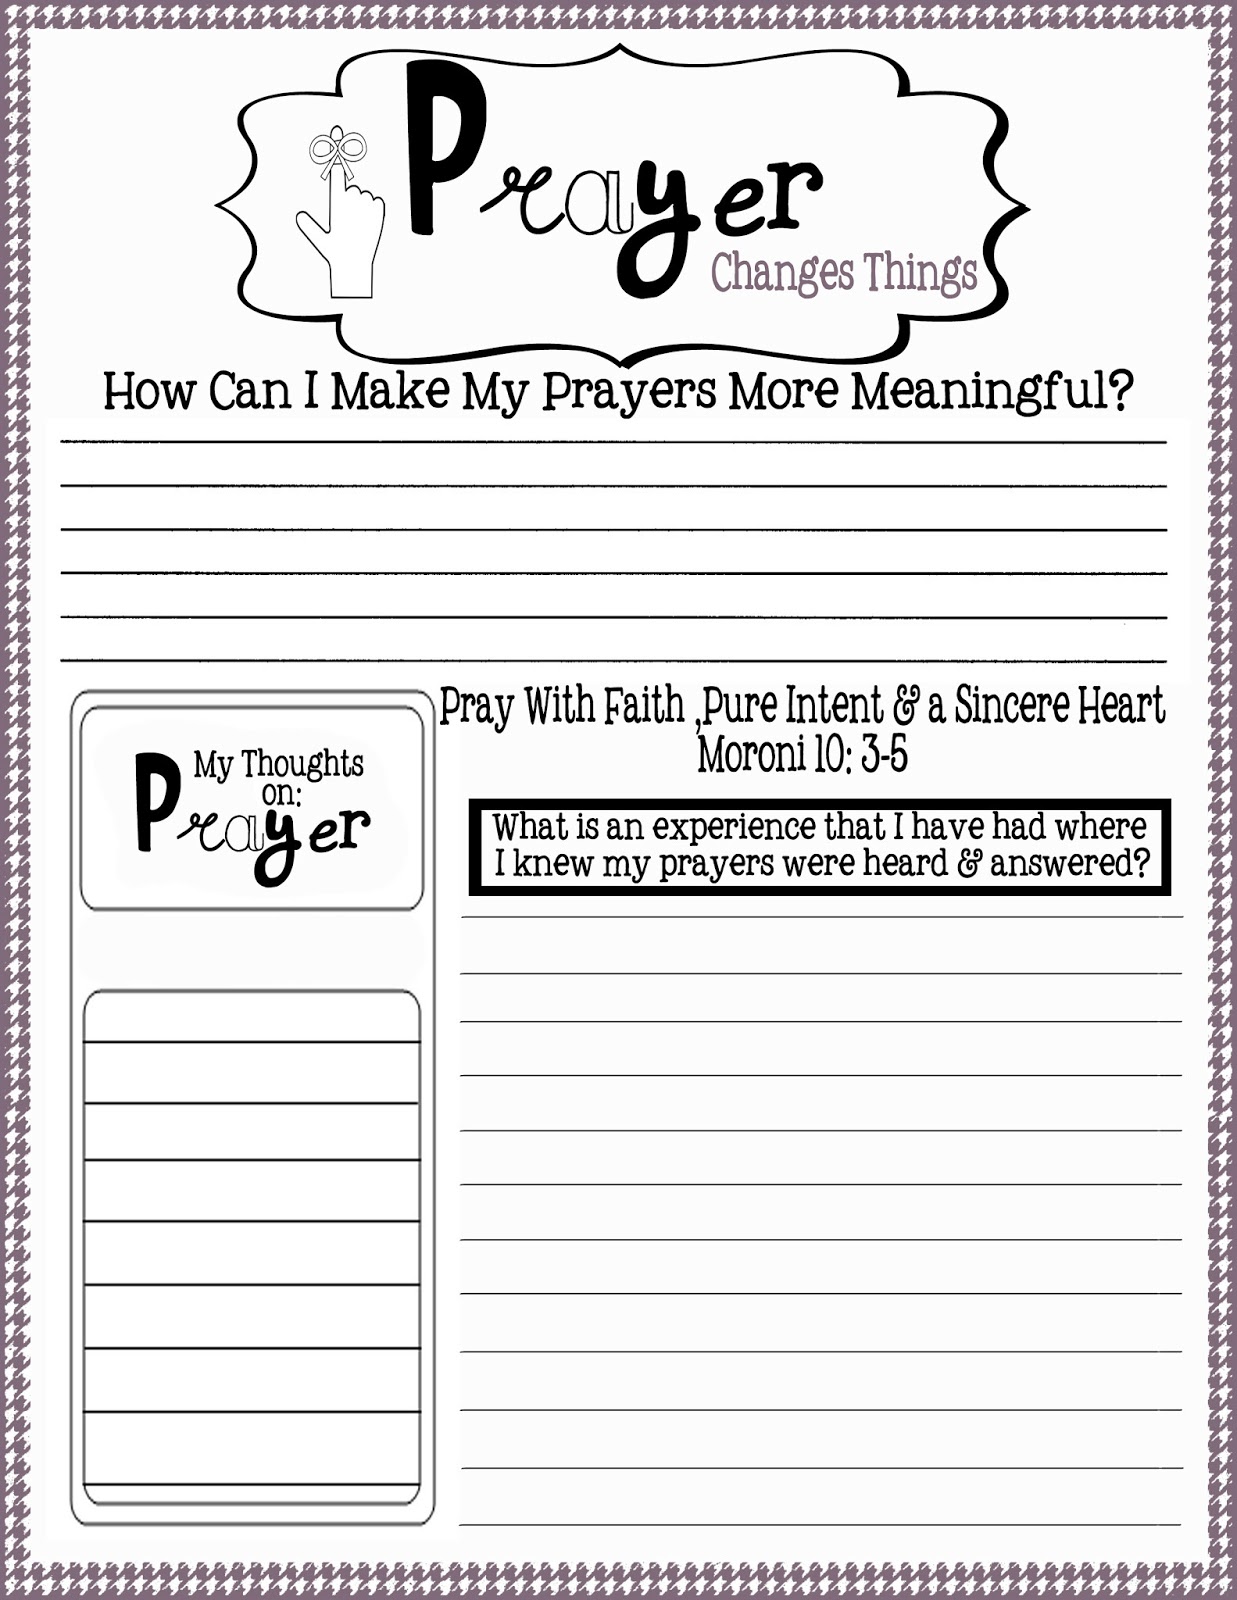 Free Printable Prayer Request Forms